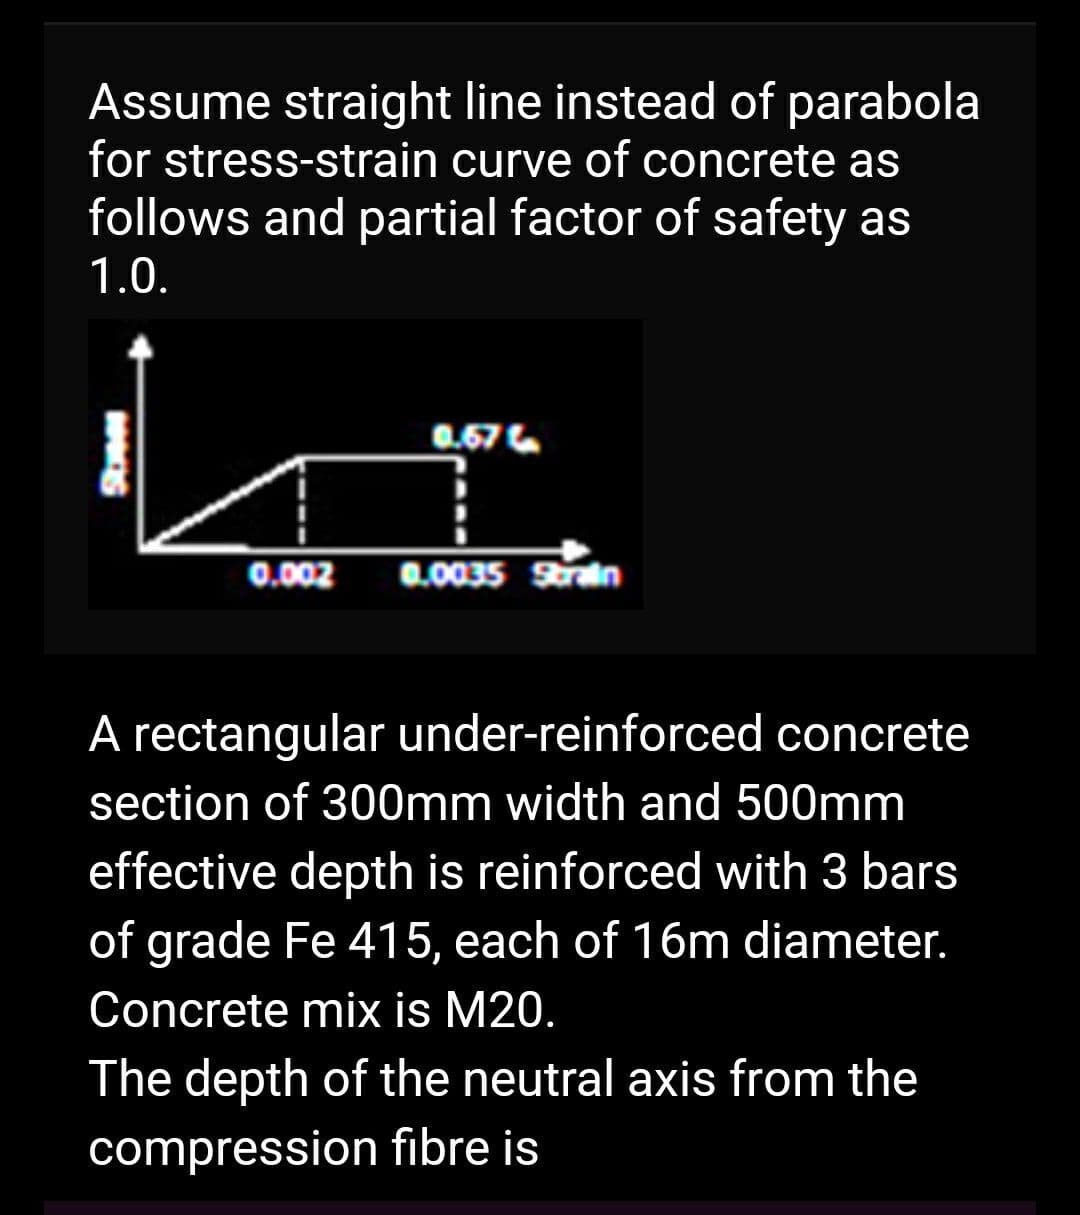 Assume straight line instead of parabola
for stress-strain curve of concrete as
follows and partial factor of safety as
1.0.
0.002
0.67
0.0035 Strain
A rectangular under-reinforced concrete
section of 300mm width and 500mm
effective depth is reinforced with 3 bars
of grade Fe 415, each of 16m diameter.
Concrete mix is M20.
The depth of the neutral axis from the
compression fibre is